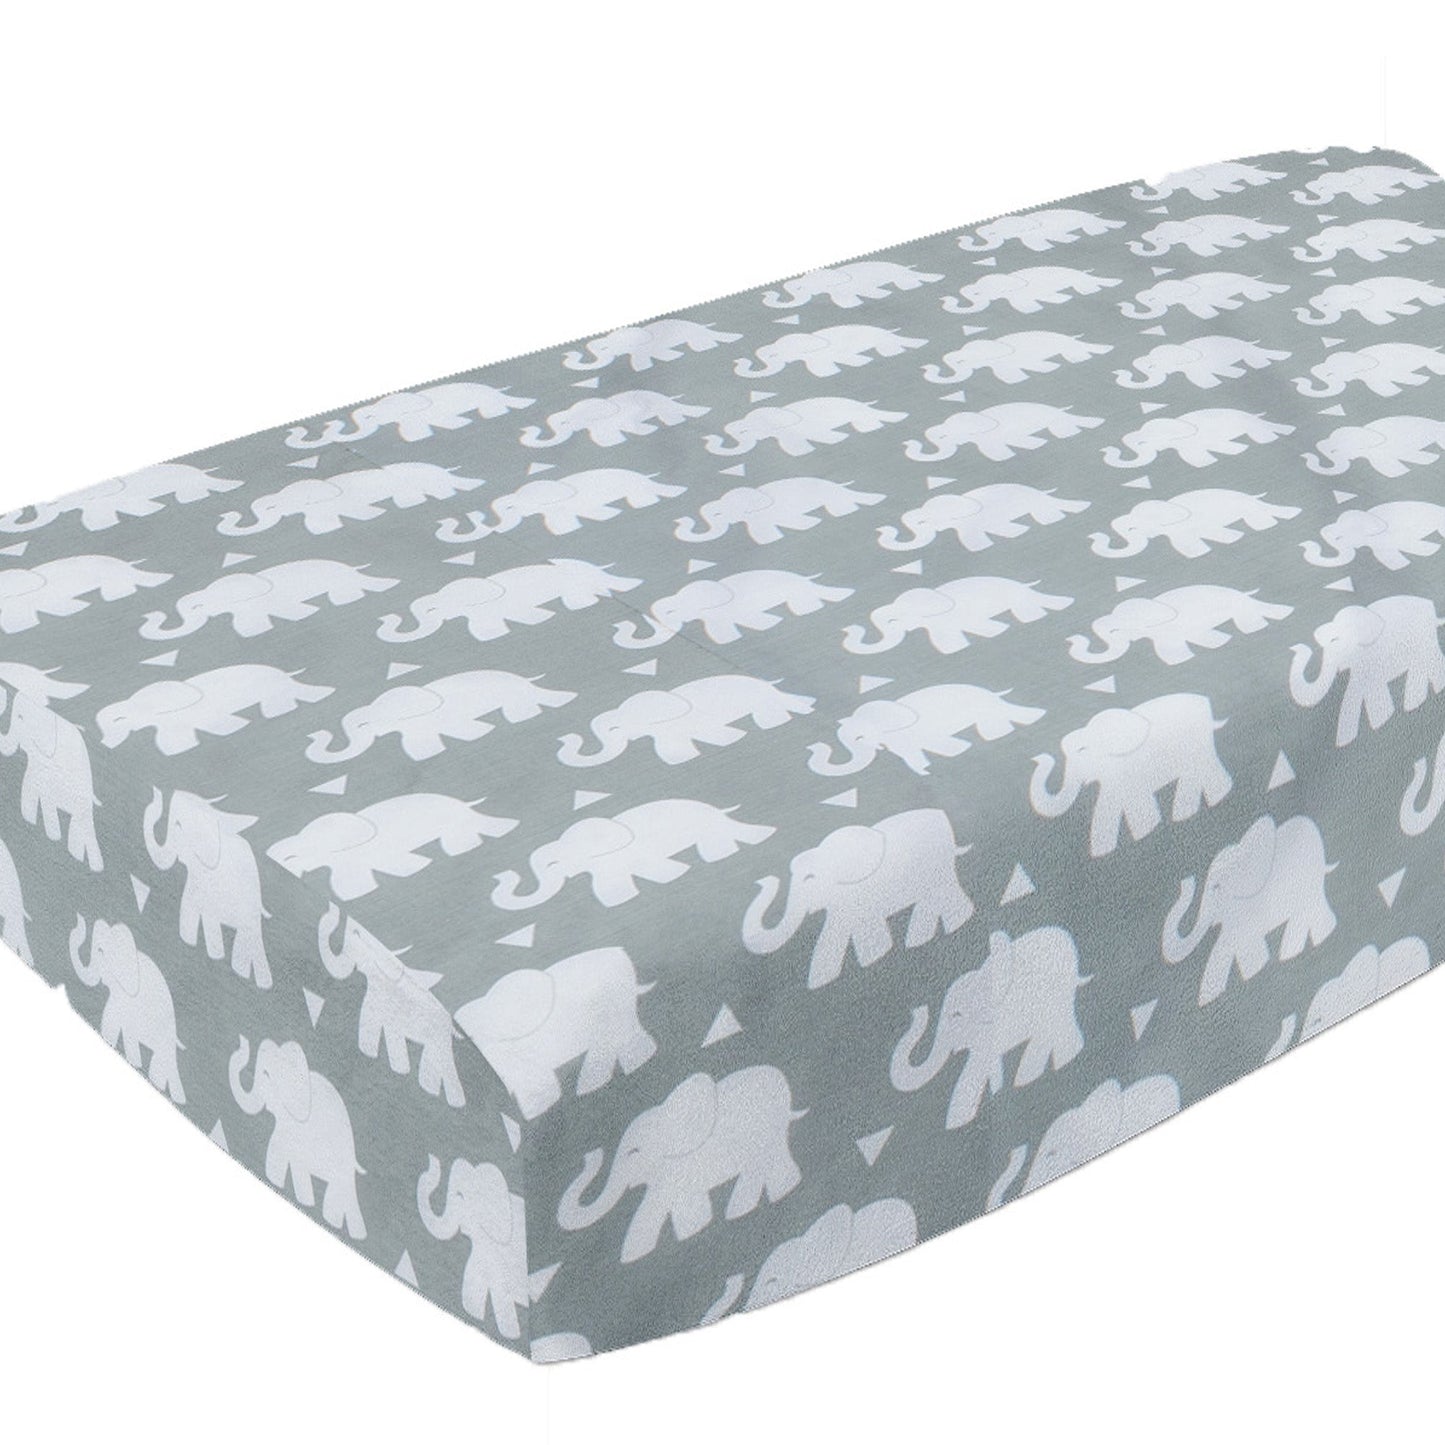 Indie Elephant Changing Pad Cover - New Arrivals Inc